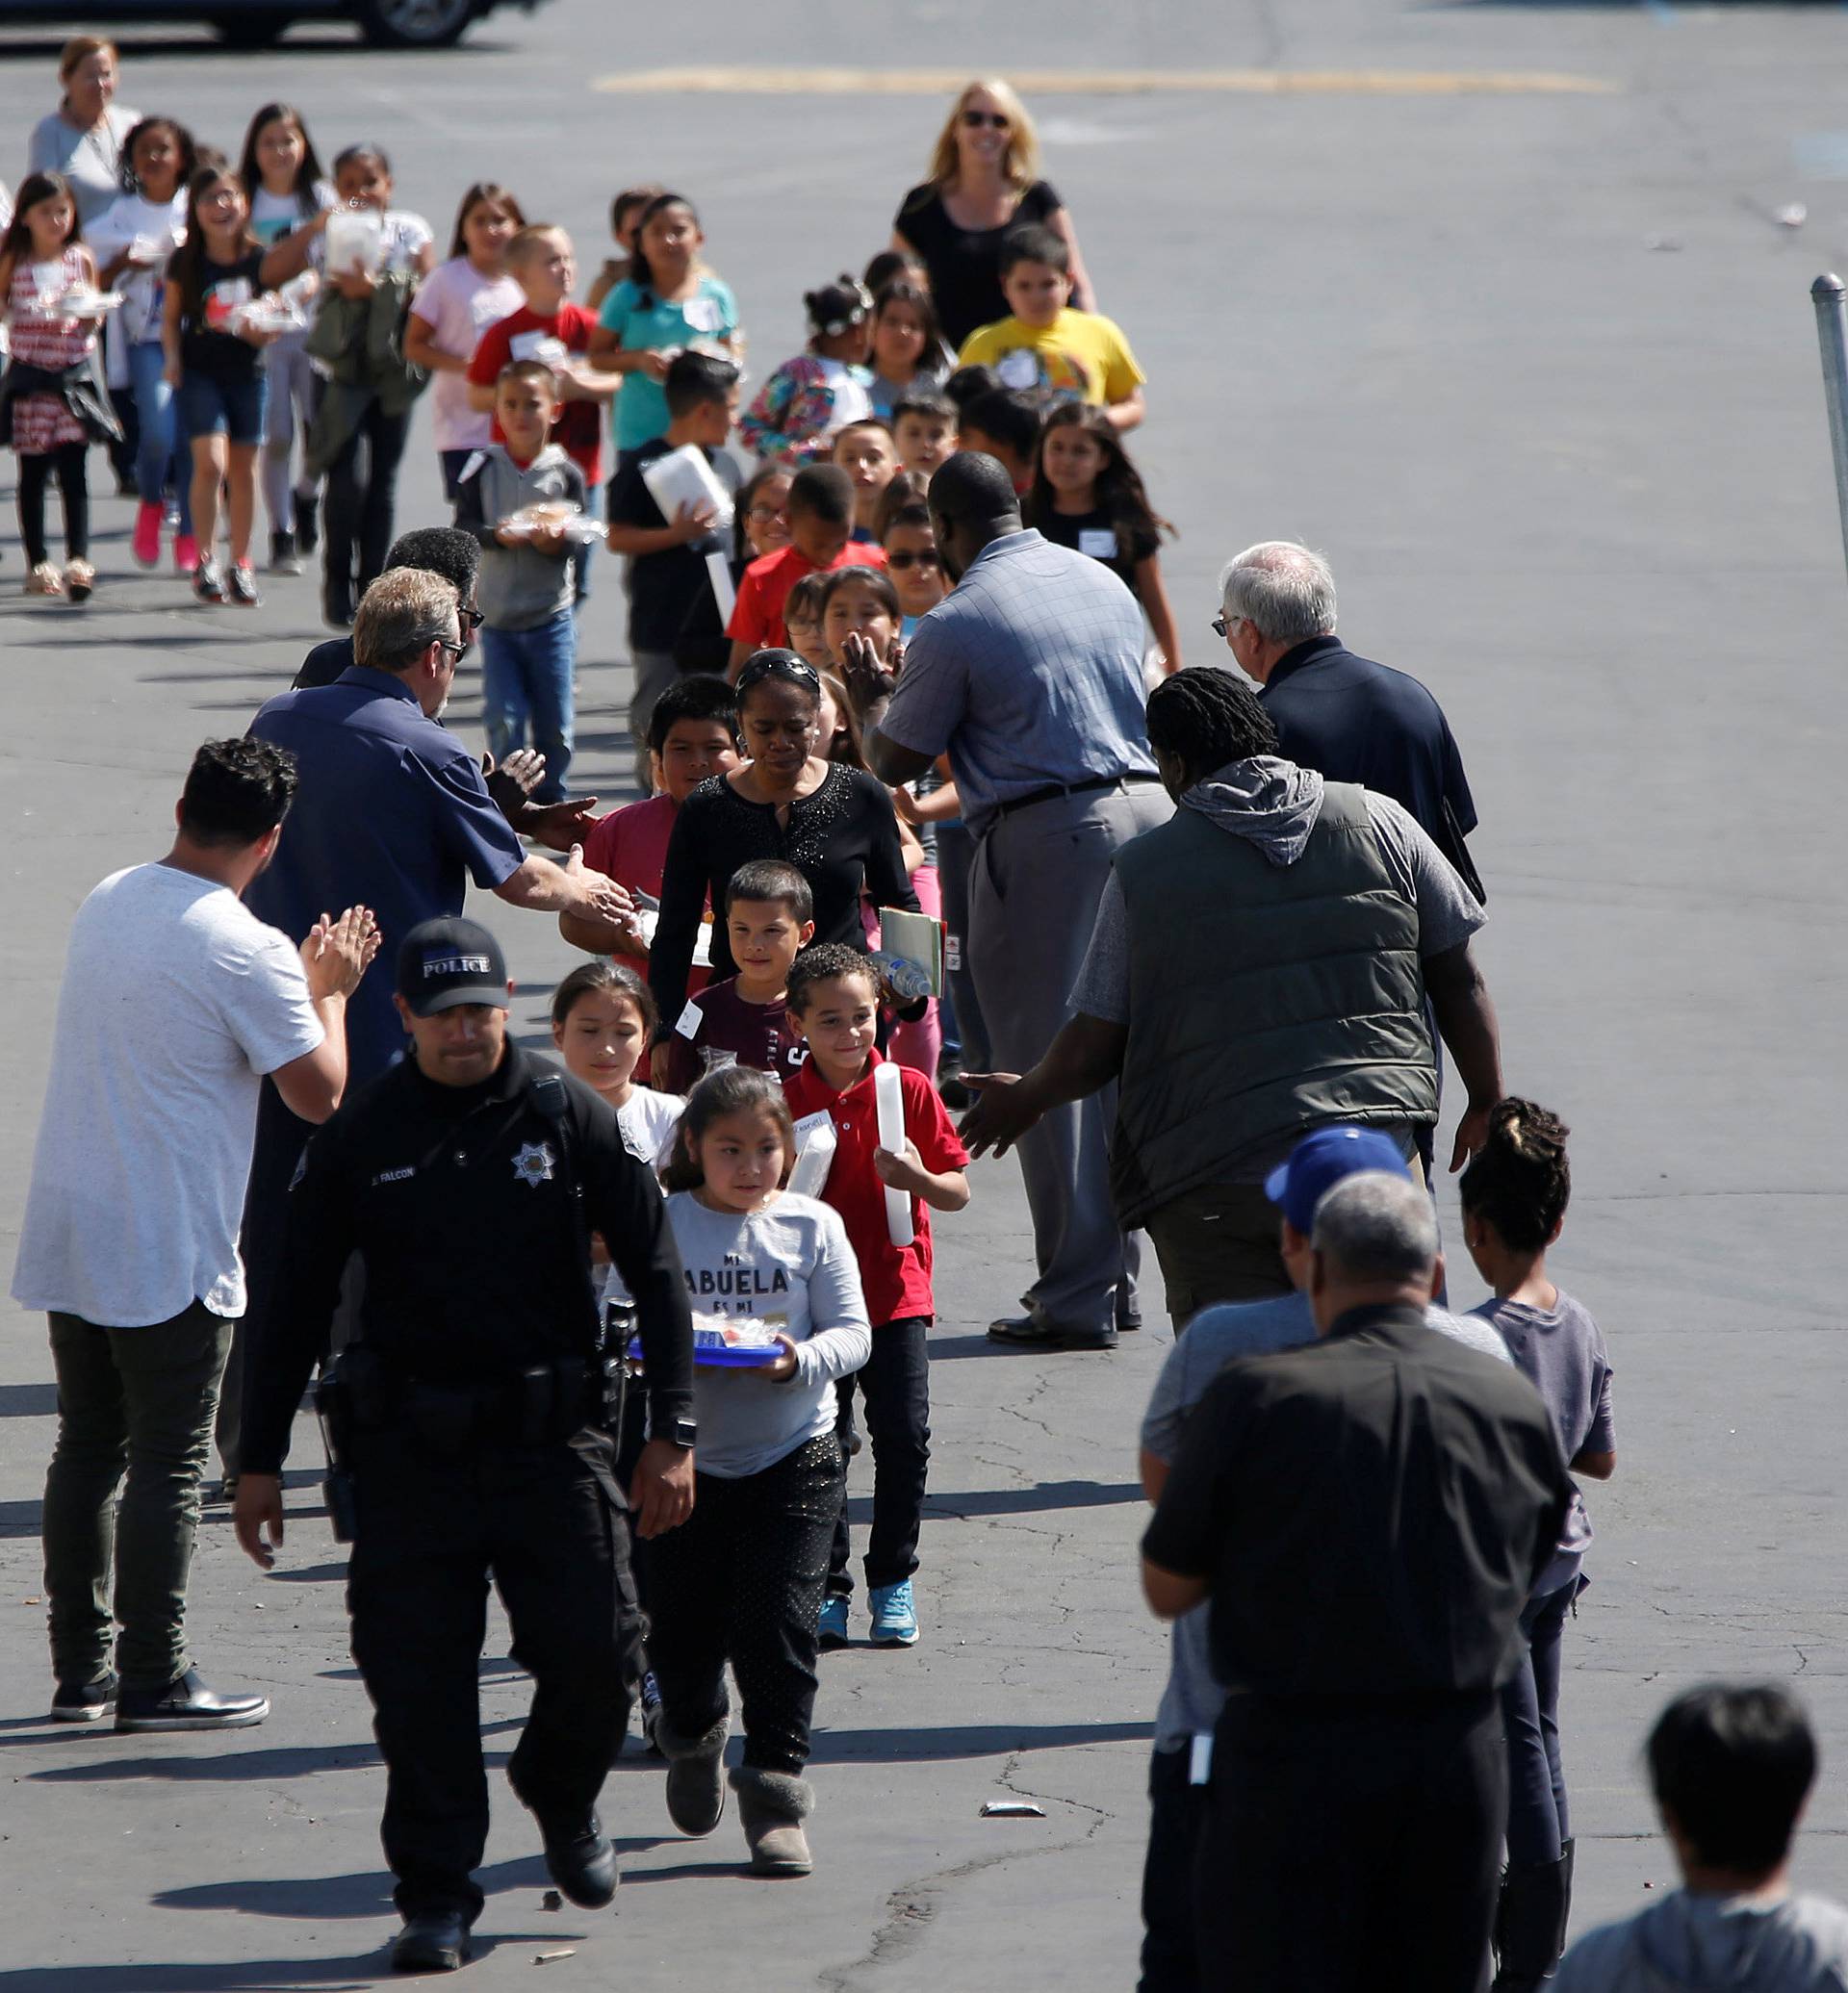 Students who were evacuated after a shooting at North Park Elementary School walk past well-wishers to be reunited with their waiting parents at a high school in San Bernardino